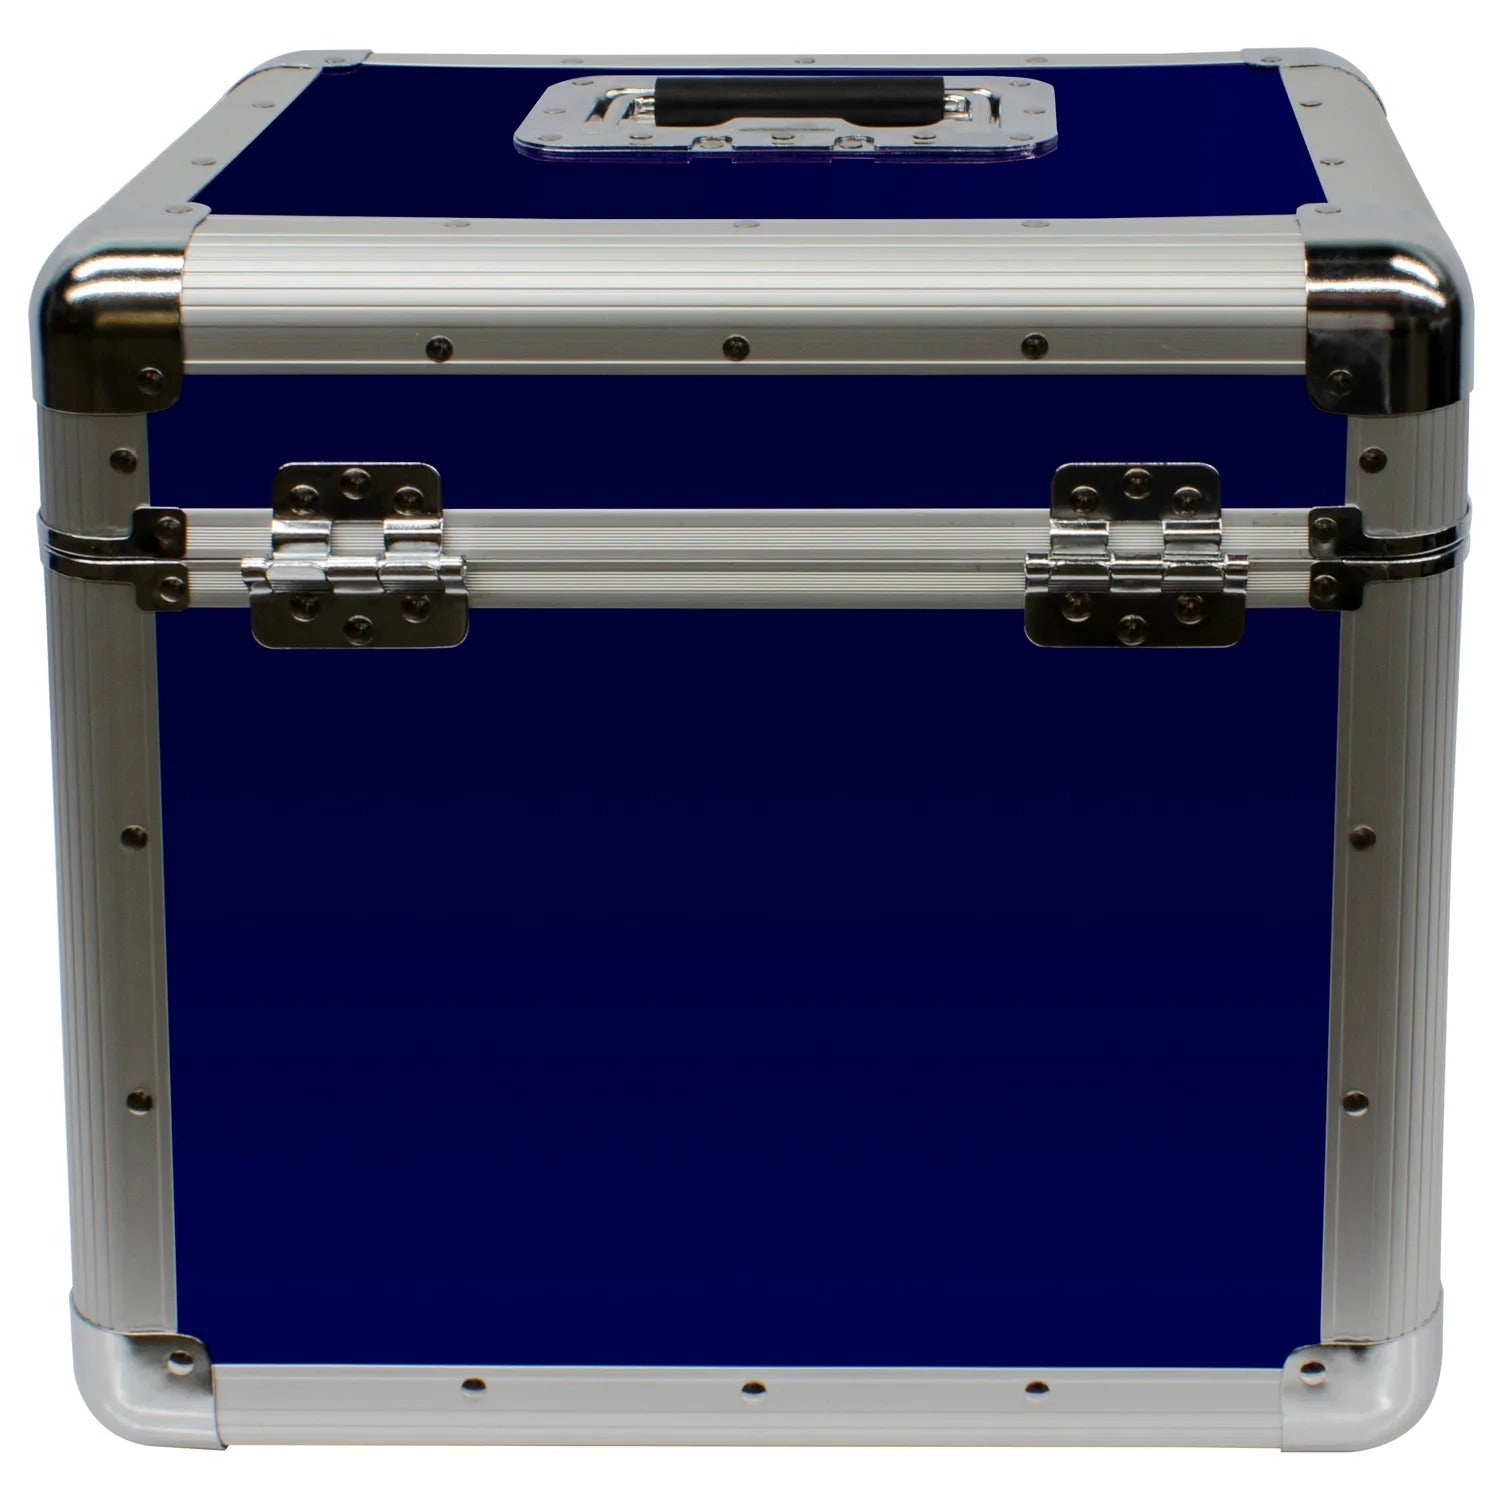 B-Stock Scratch & Dent: Odyssey KLP2BLU, KROM Series Blue Stackable Record / Utility Case for 70 12in Vinyl Records And LPs - Hollywood DJ